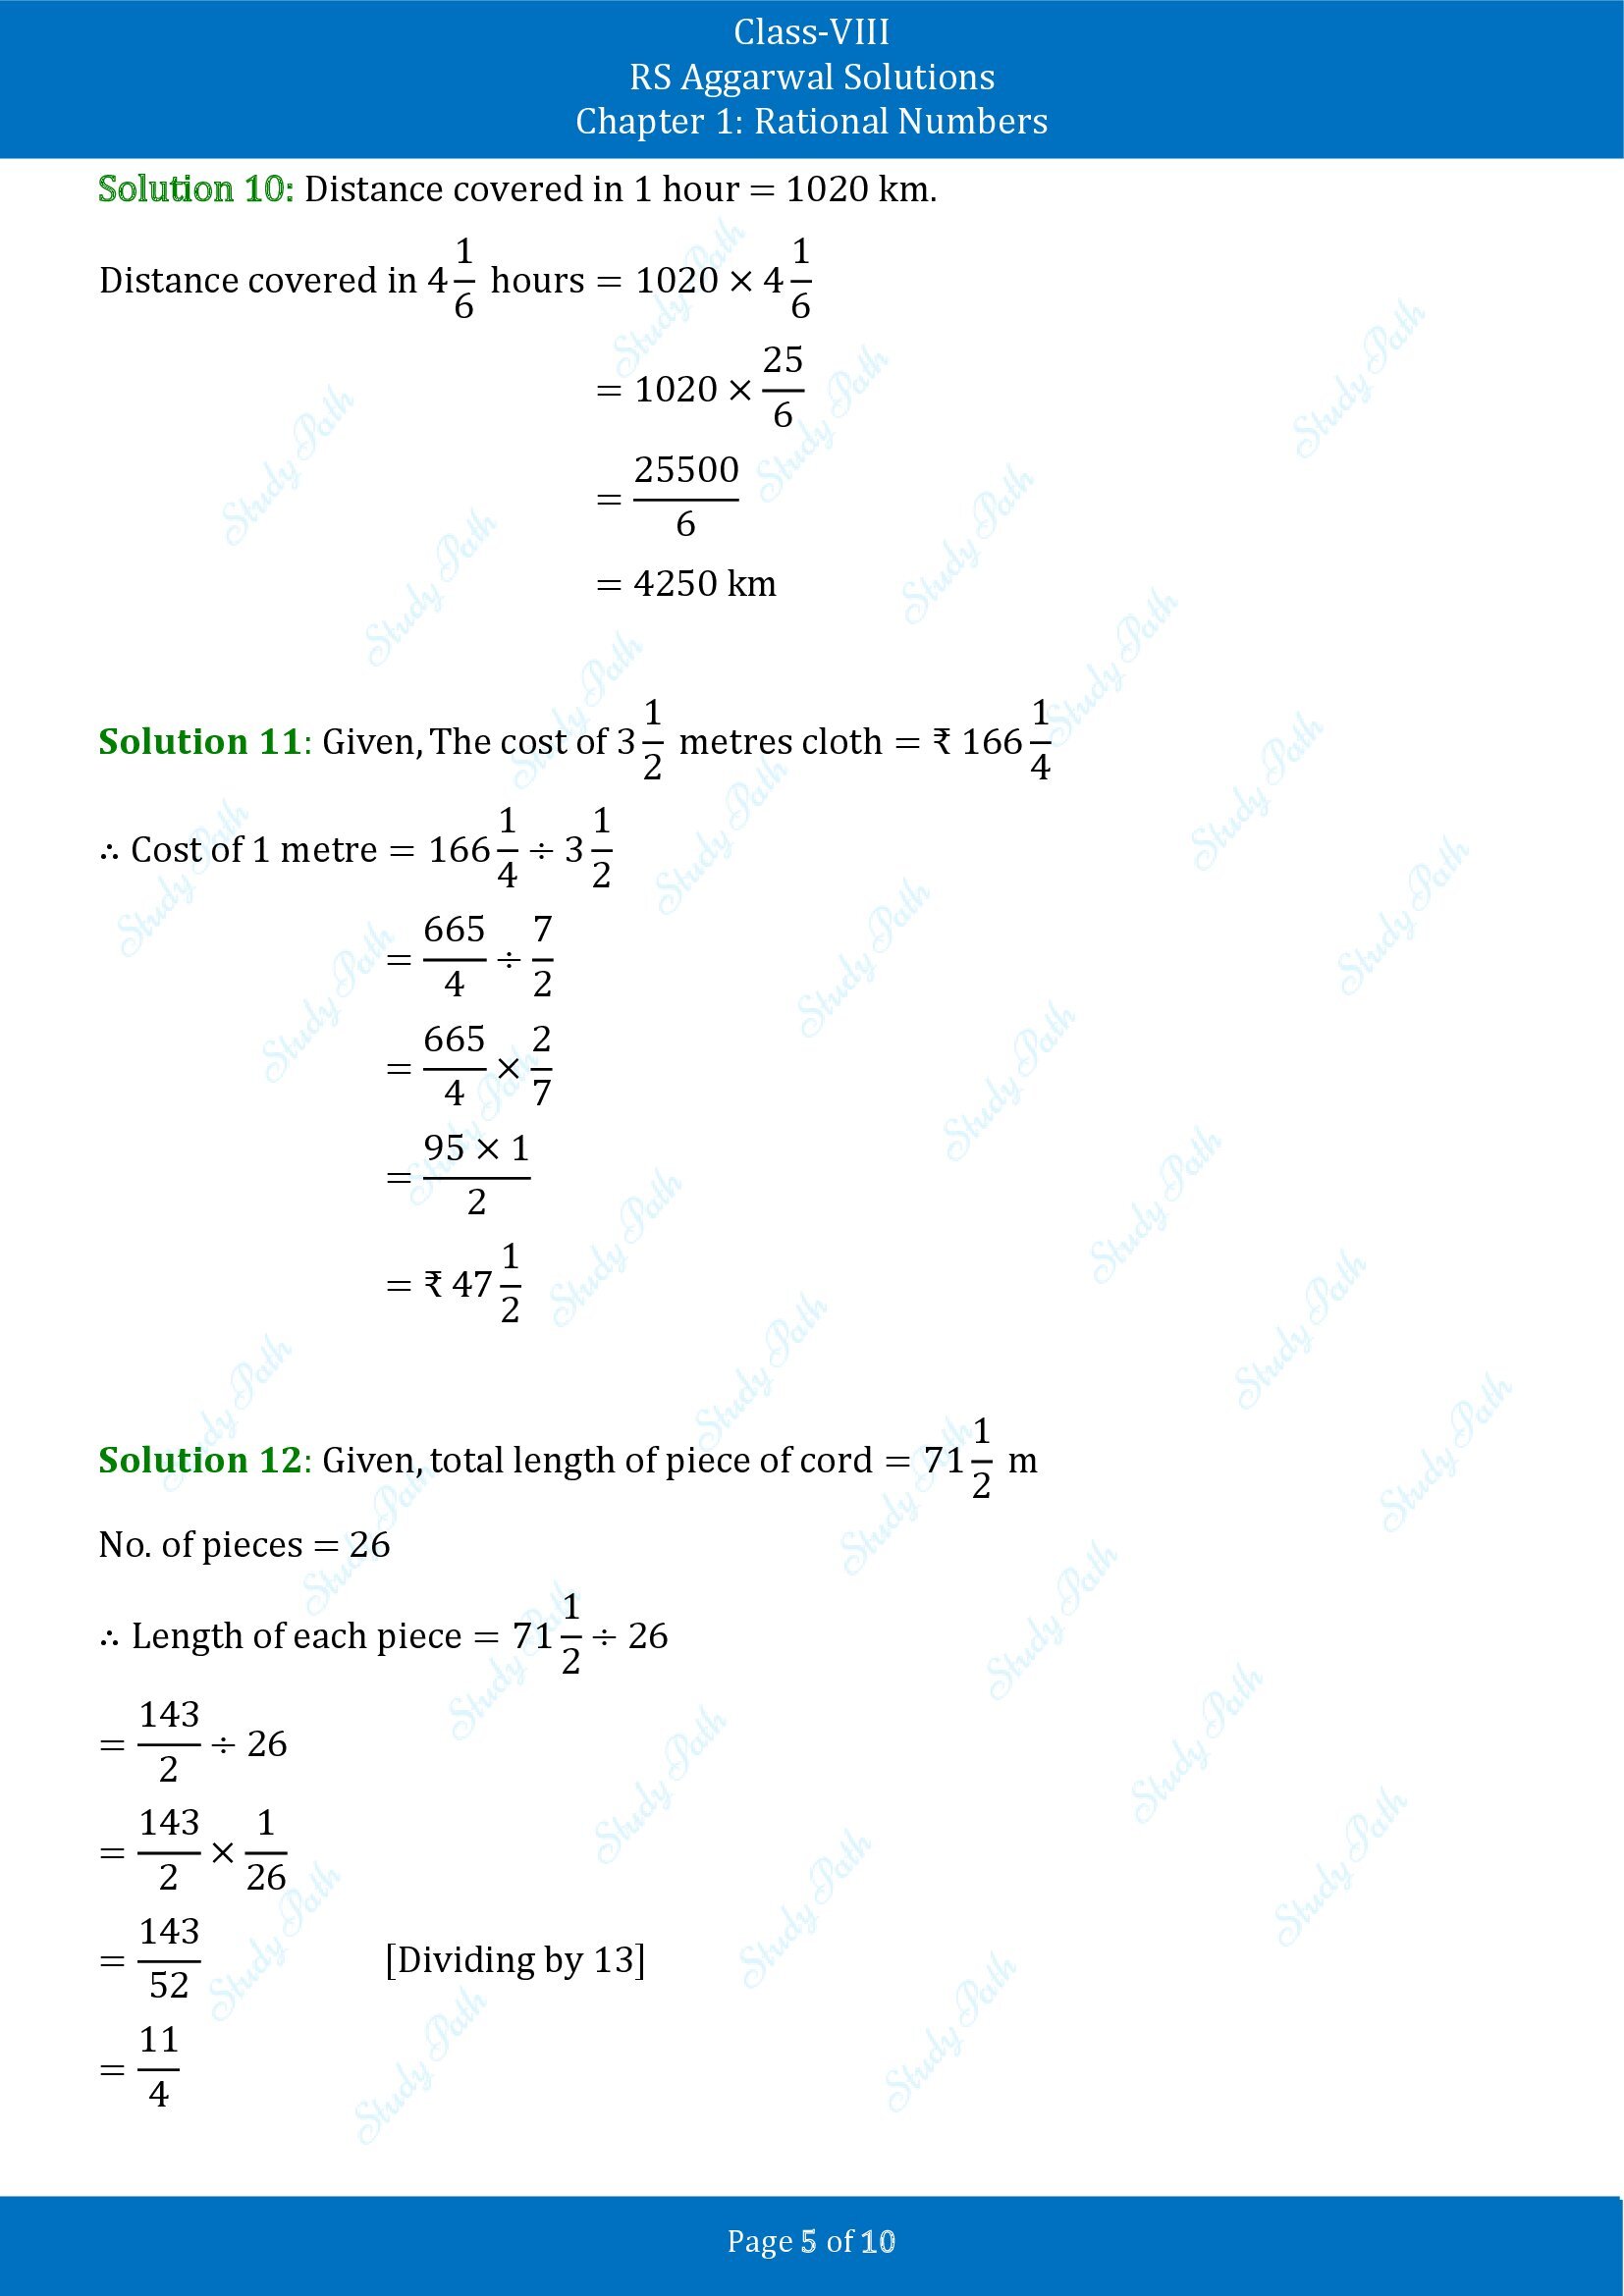 RS Aggarwal Solutions Class 8 Chapter 1 Rational Numbers Exercise 1G 00005